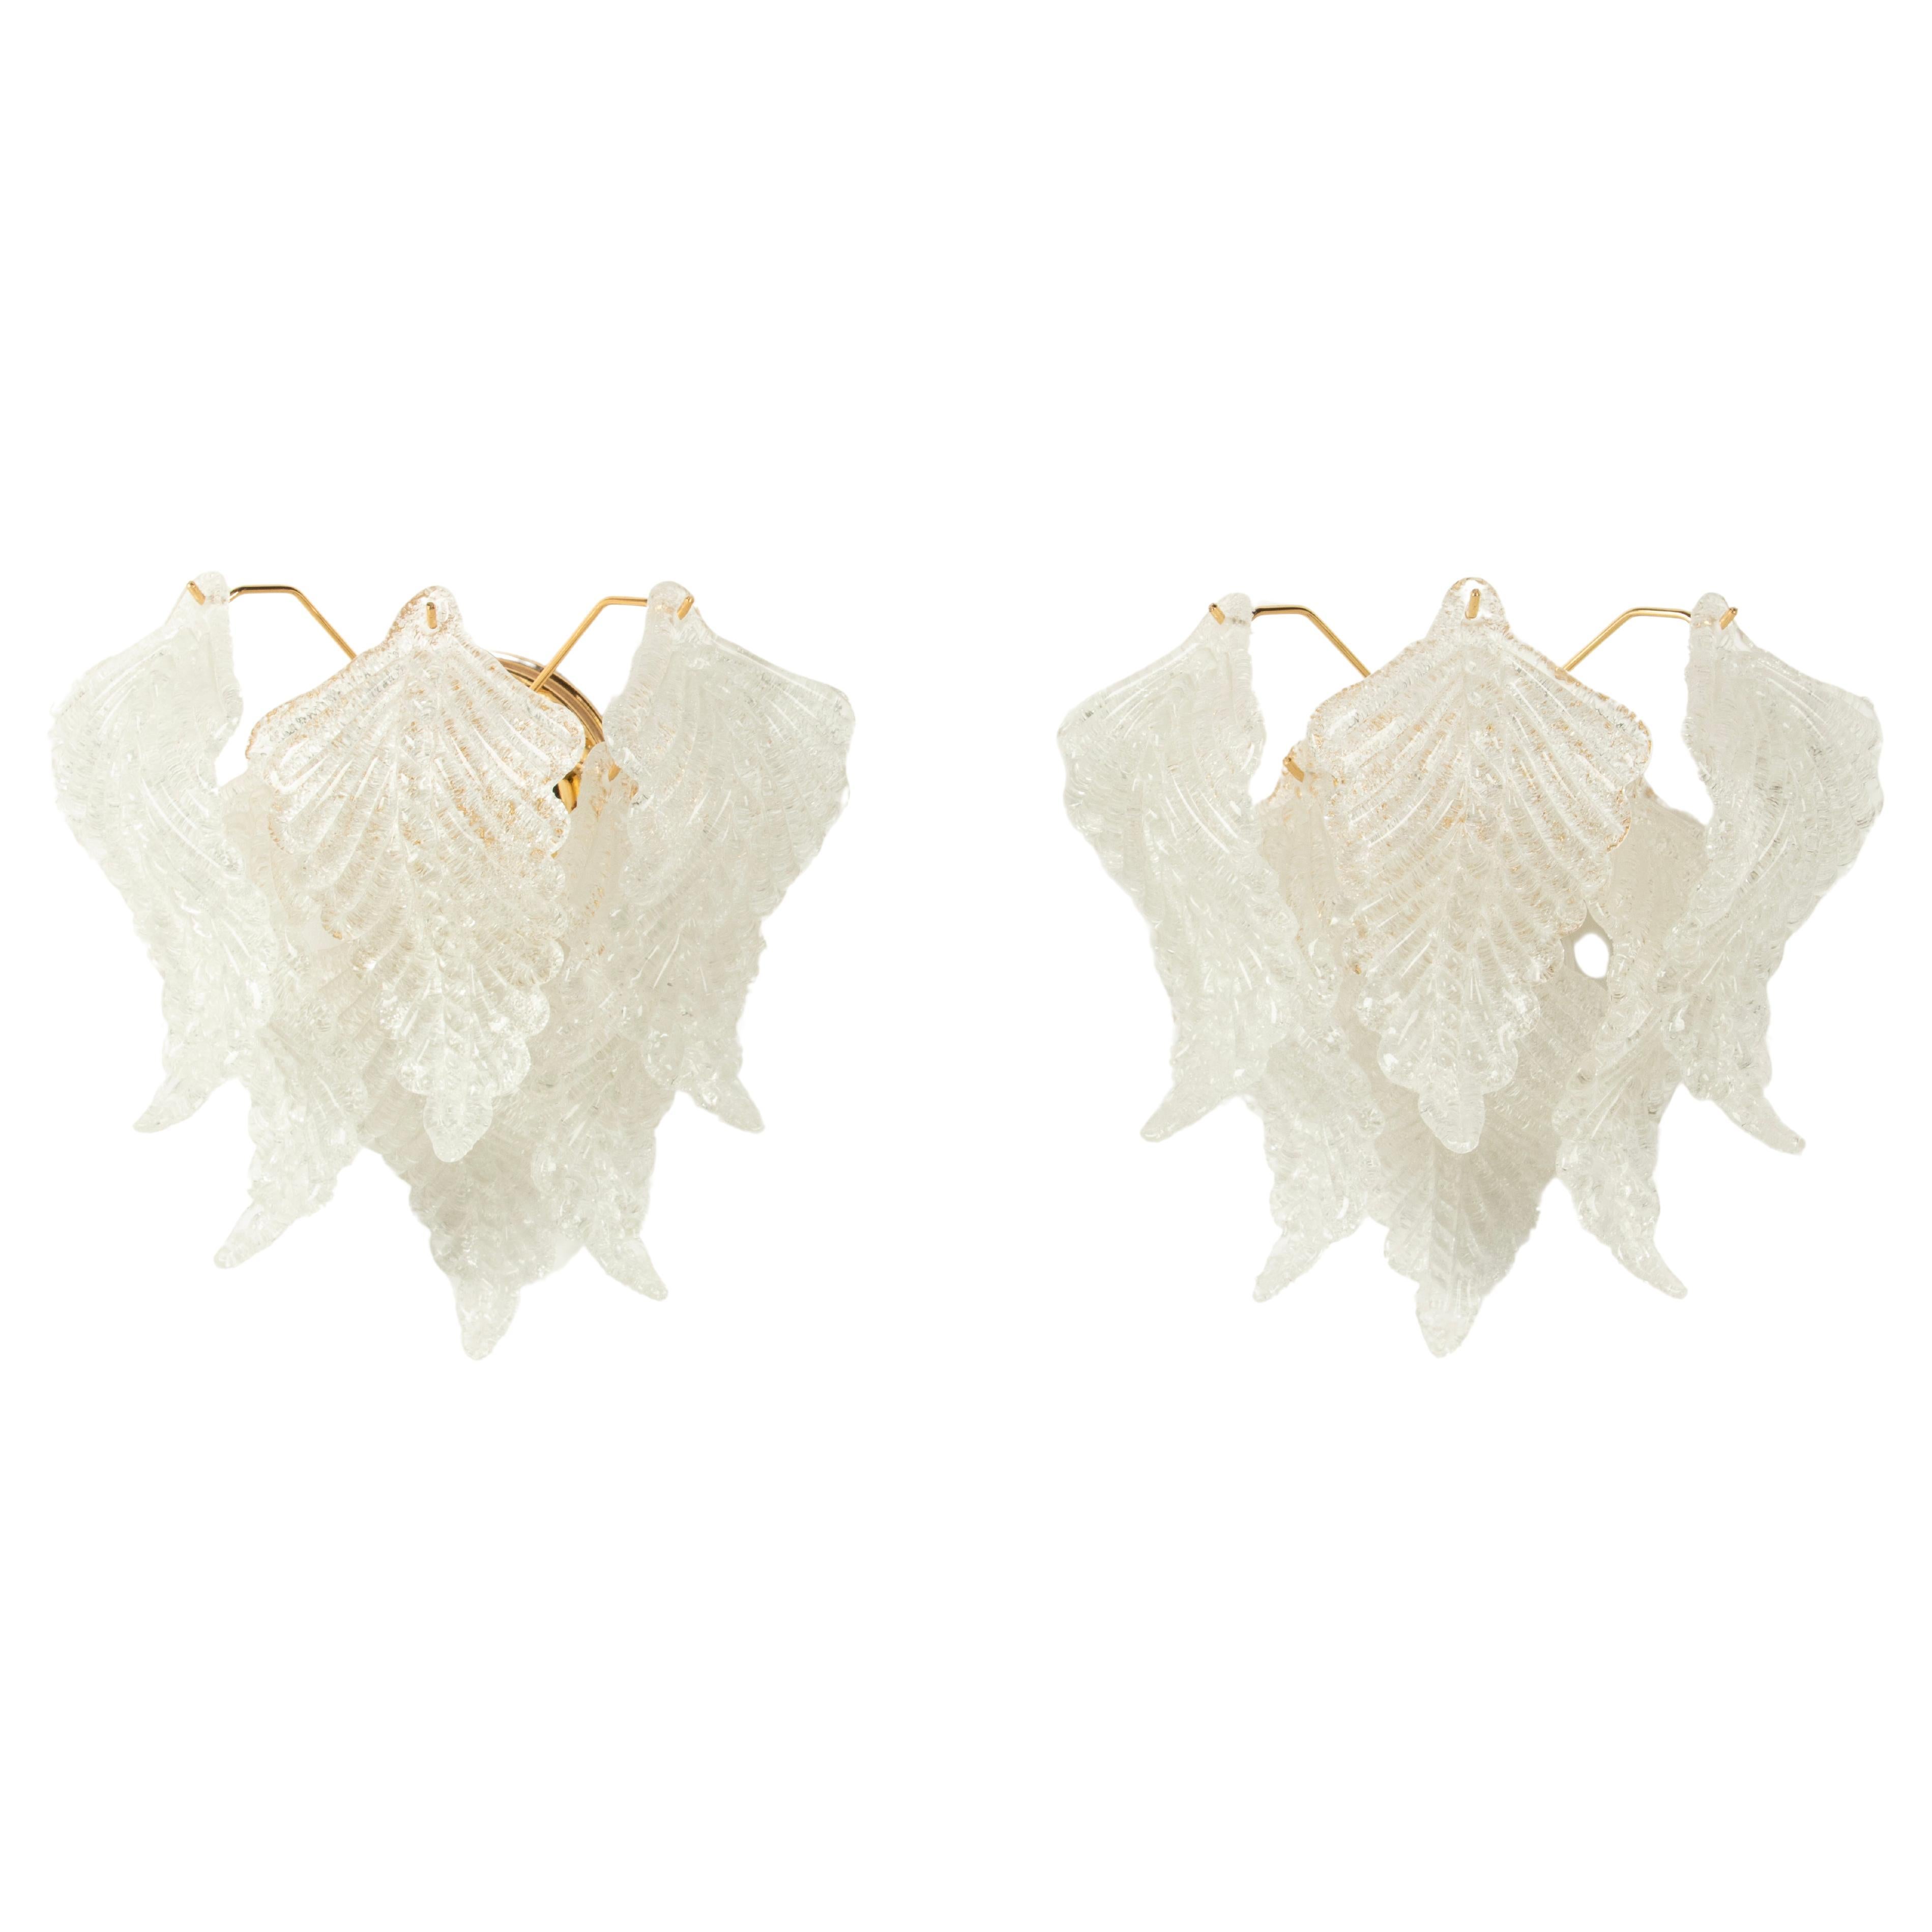 A Pair Mid-Century Wall Sconces Murano Leaf Shaped Shades - Industria Veneziana For Sale